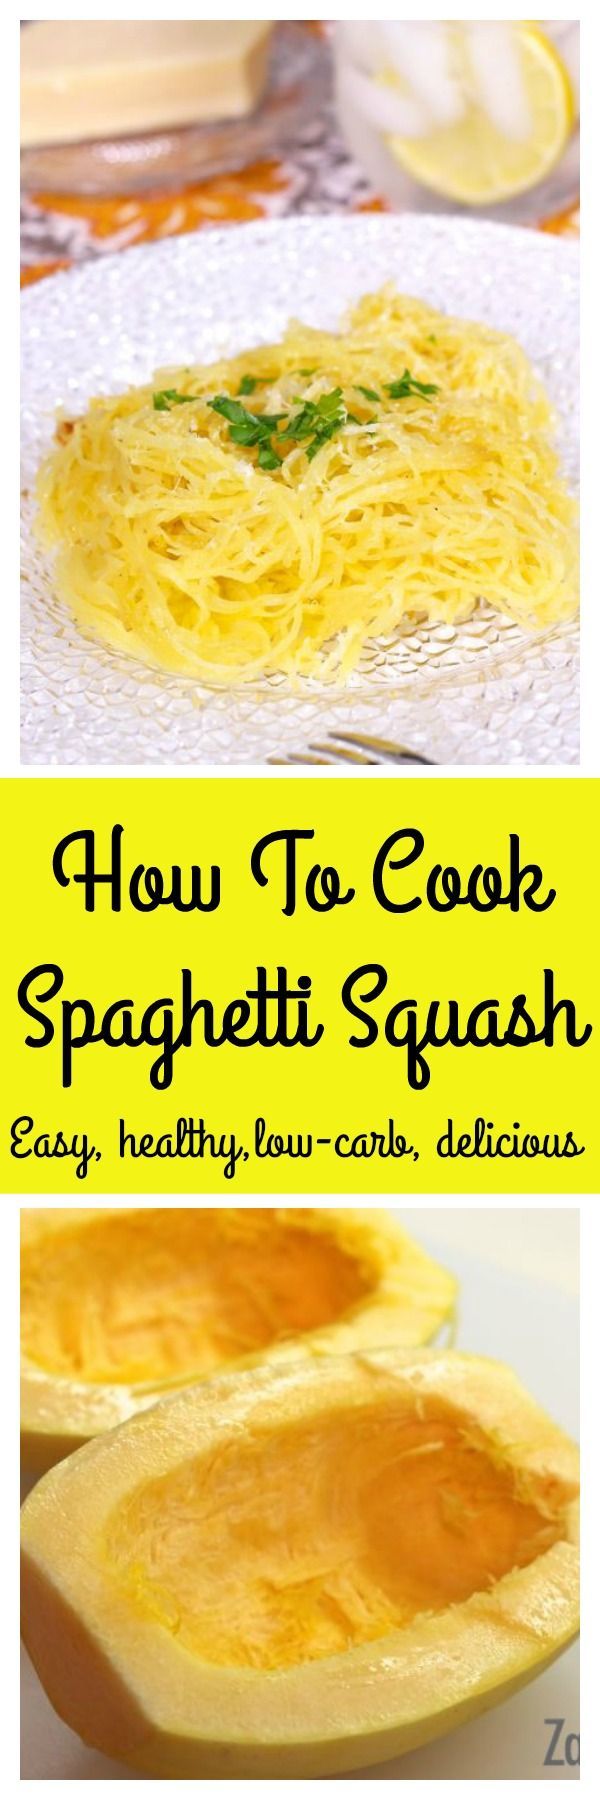 See just how easy it is to cook spaghetti squash, a flavorful and low carb alternative to pasta.  Step by step recipe instructions